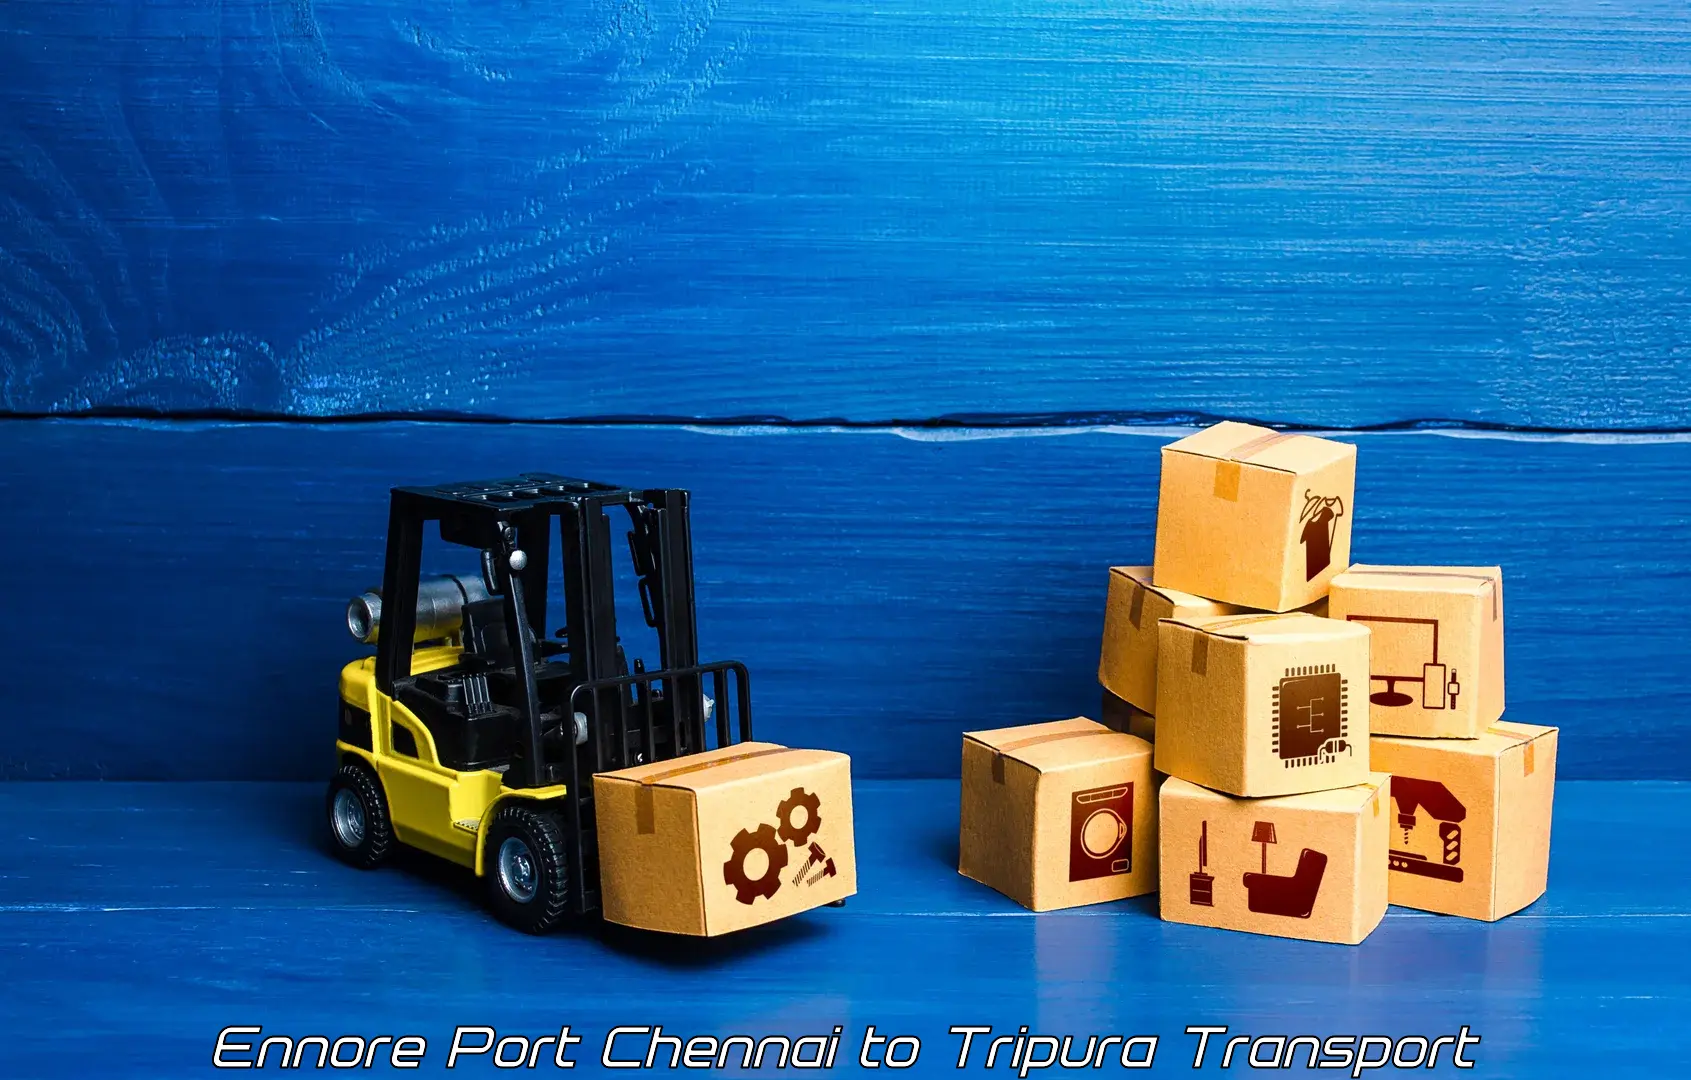 Goods delivery service Ennore Port Chennai to Kailashahar